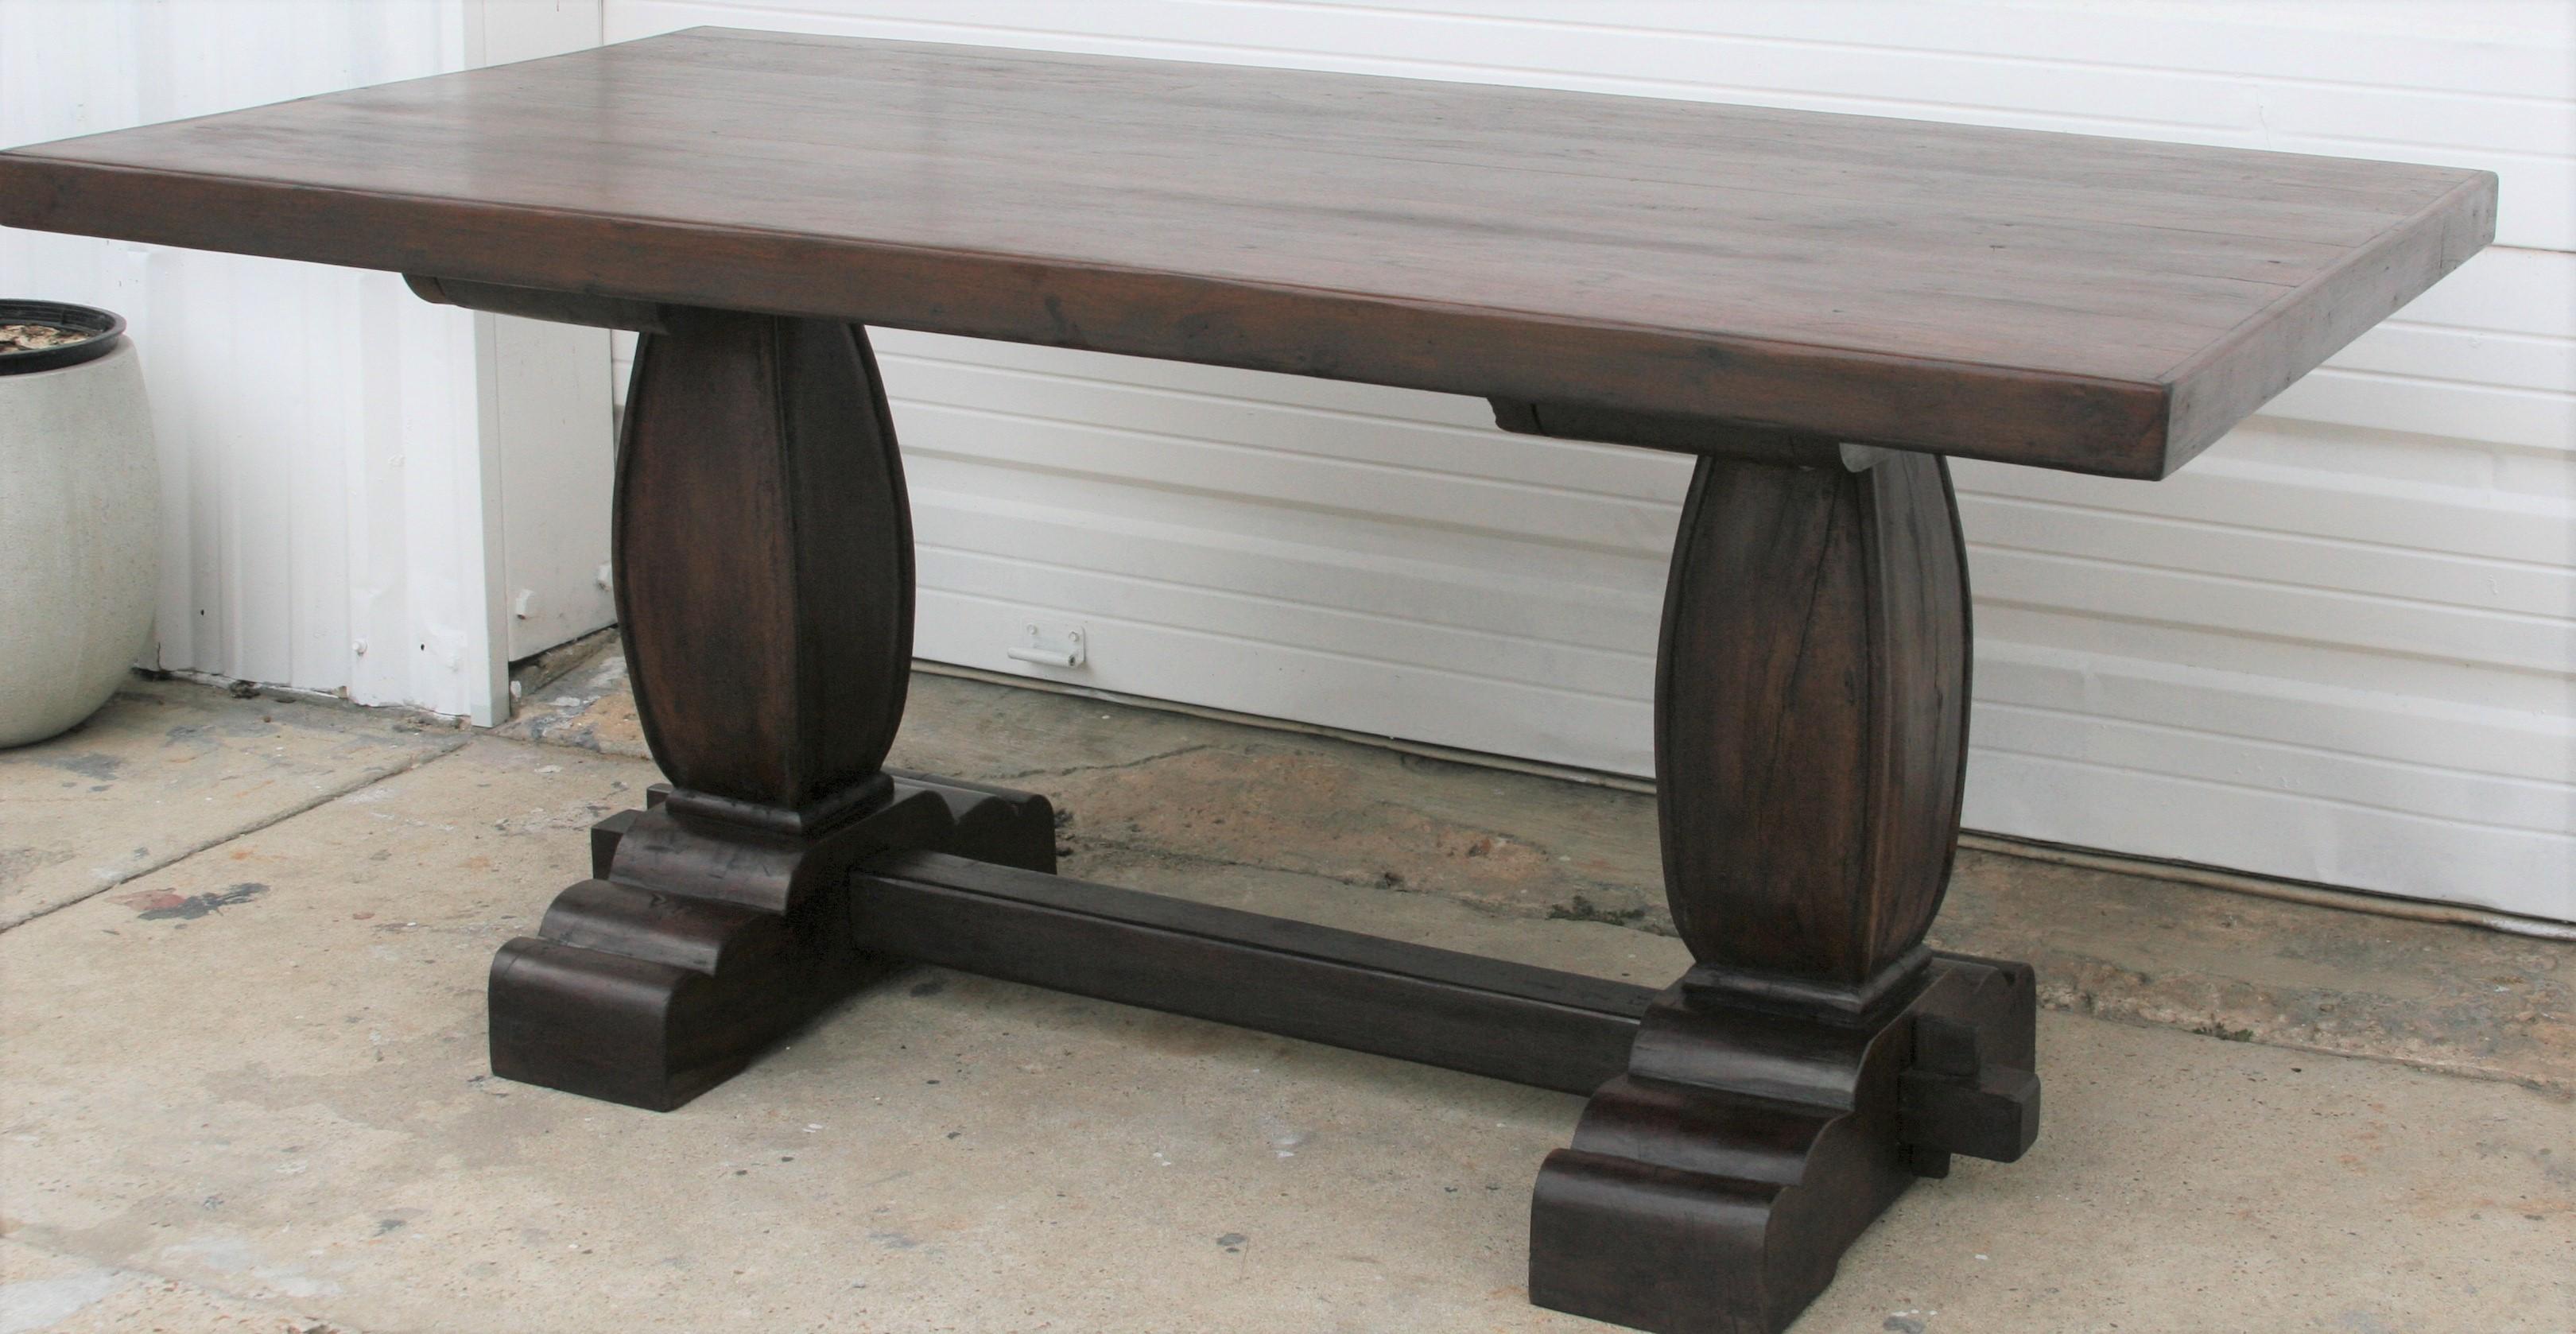 This inimitable heavily made solid teak wood table has everything one could wish for in a traditional family table. It is 100% teak and is almost indestructible. It is meant to last generations. Unmatched mellowing wood patina. Fine wood grain. Old